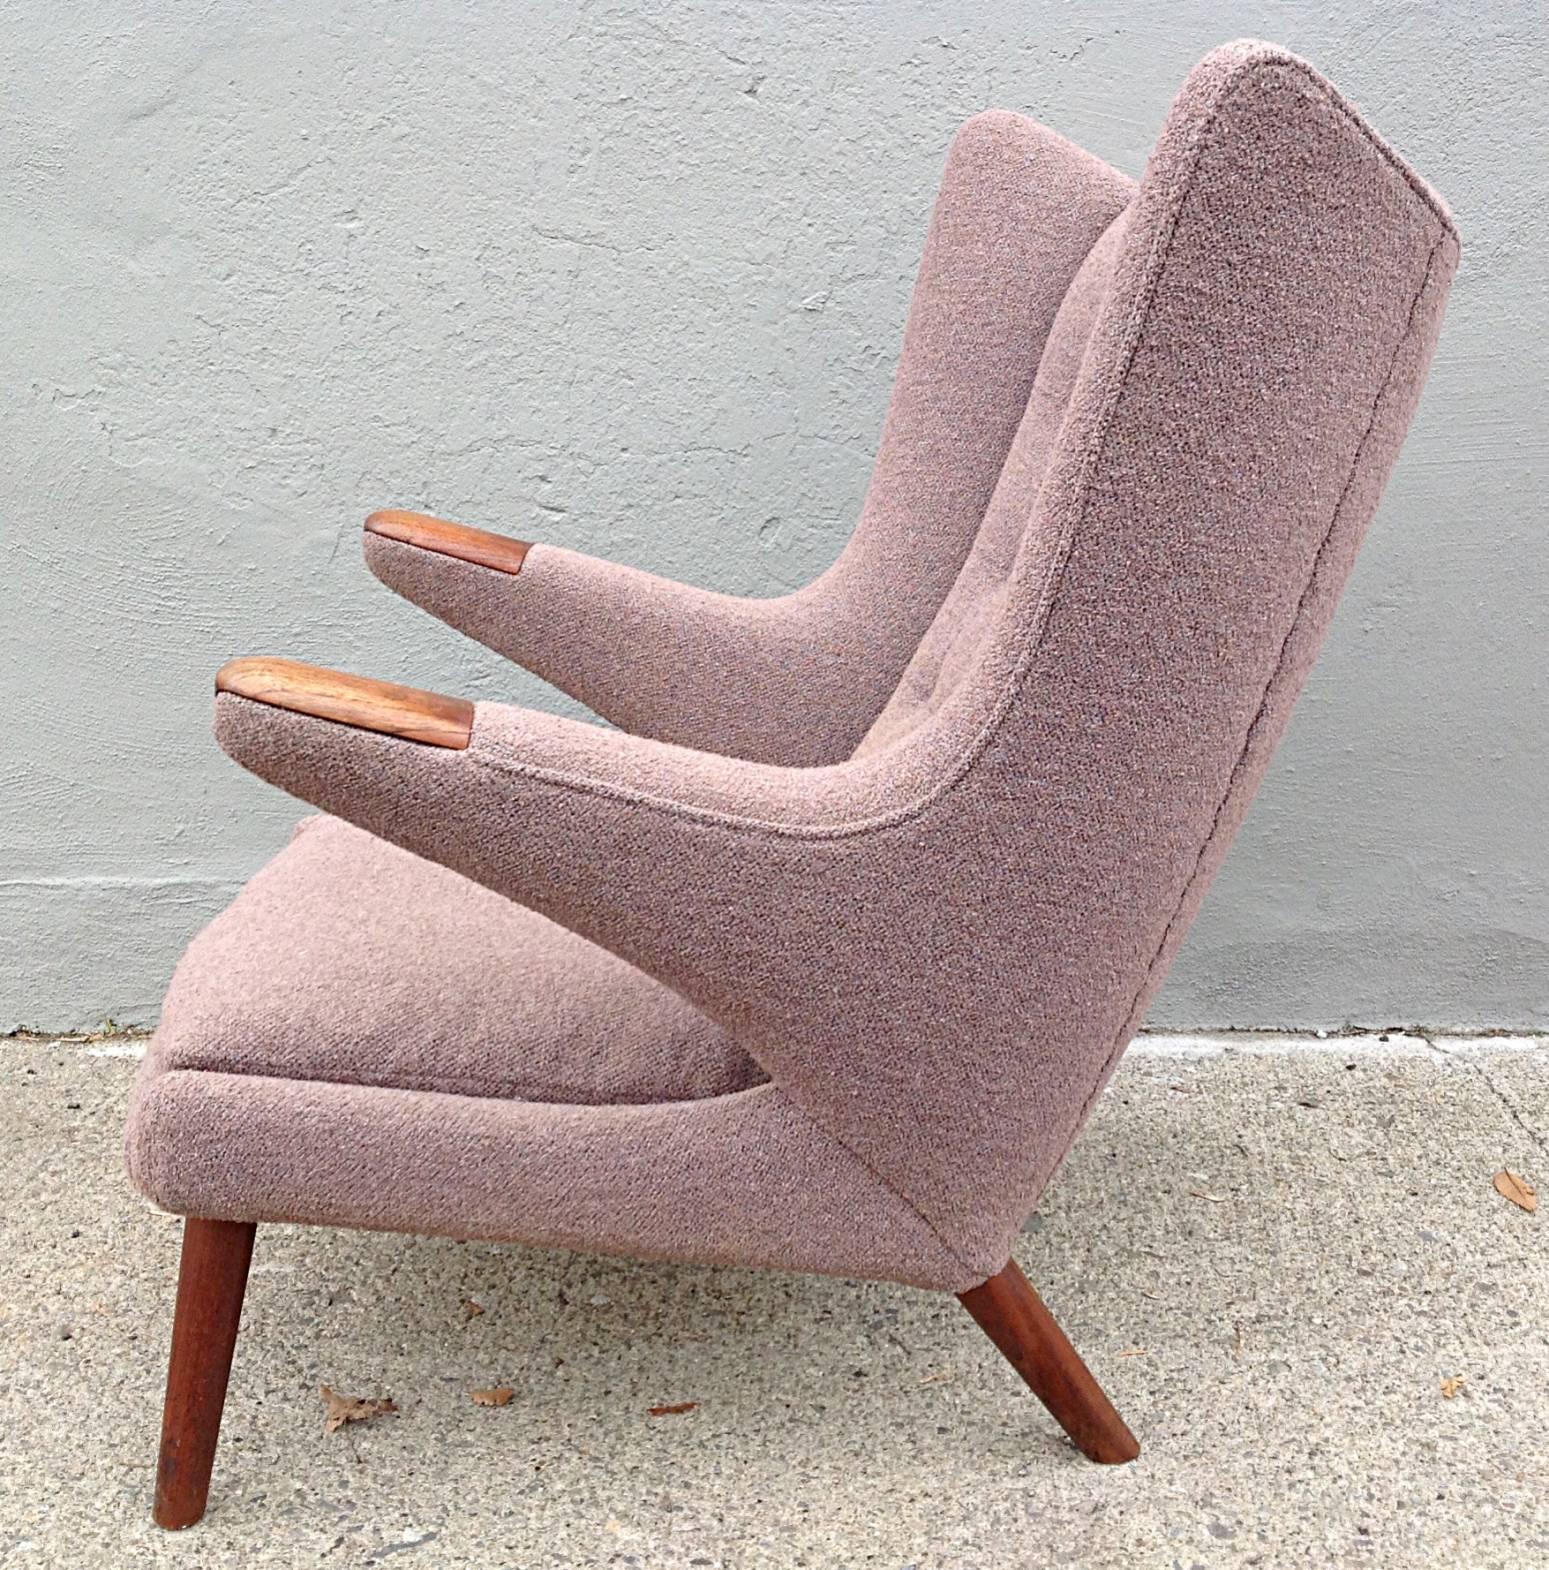 Hans Wegner for AP Stolen Papa Bear chair AP19. Dusty lavender bouclé not original but in very good condition. Exposed wood elements in very good condition rich patina and wear.